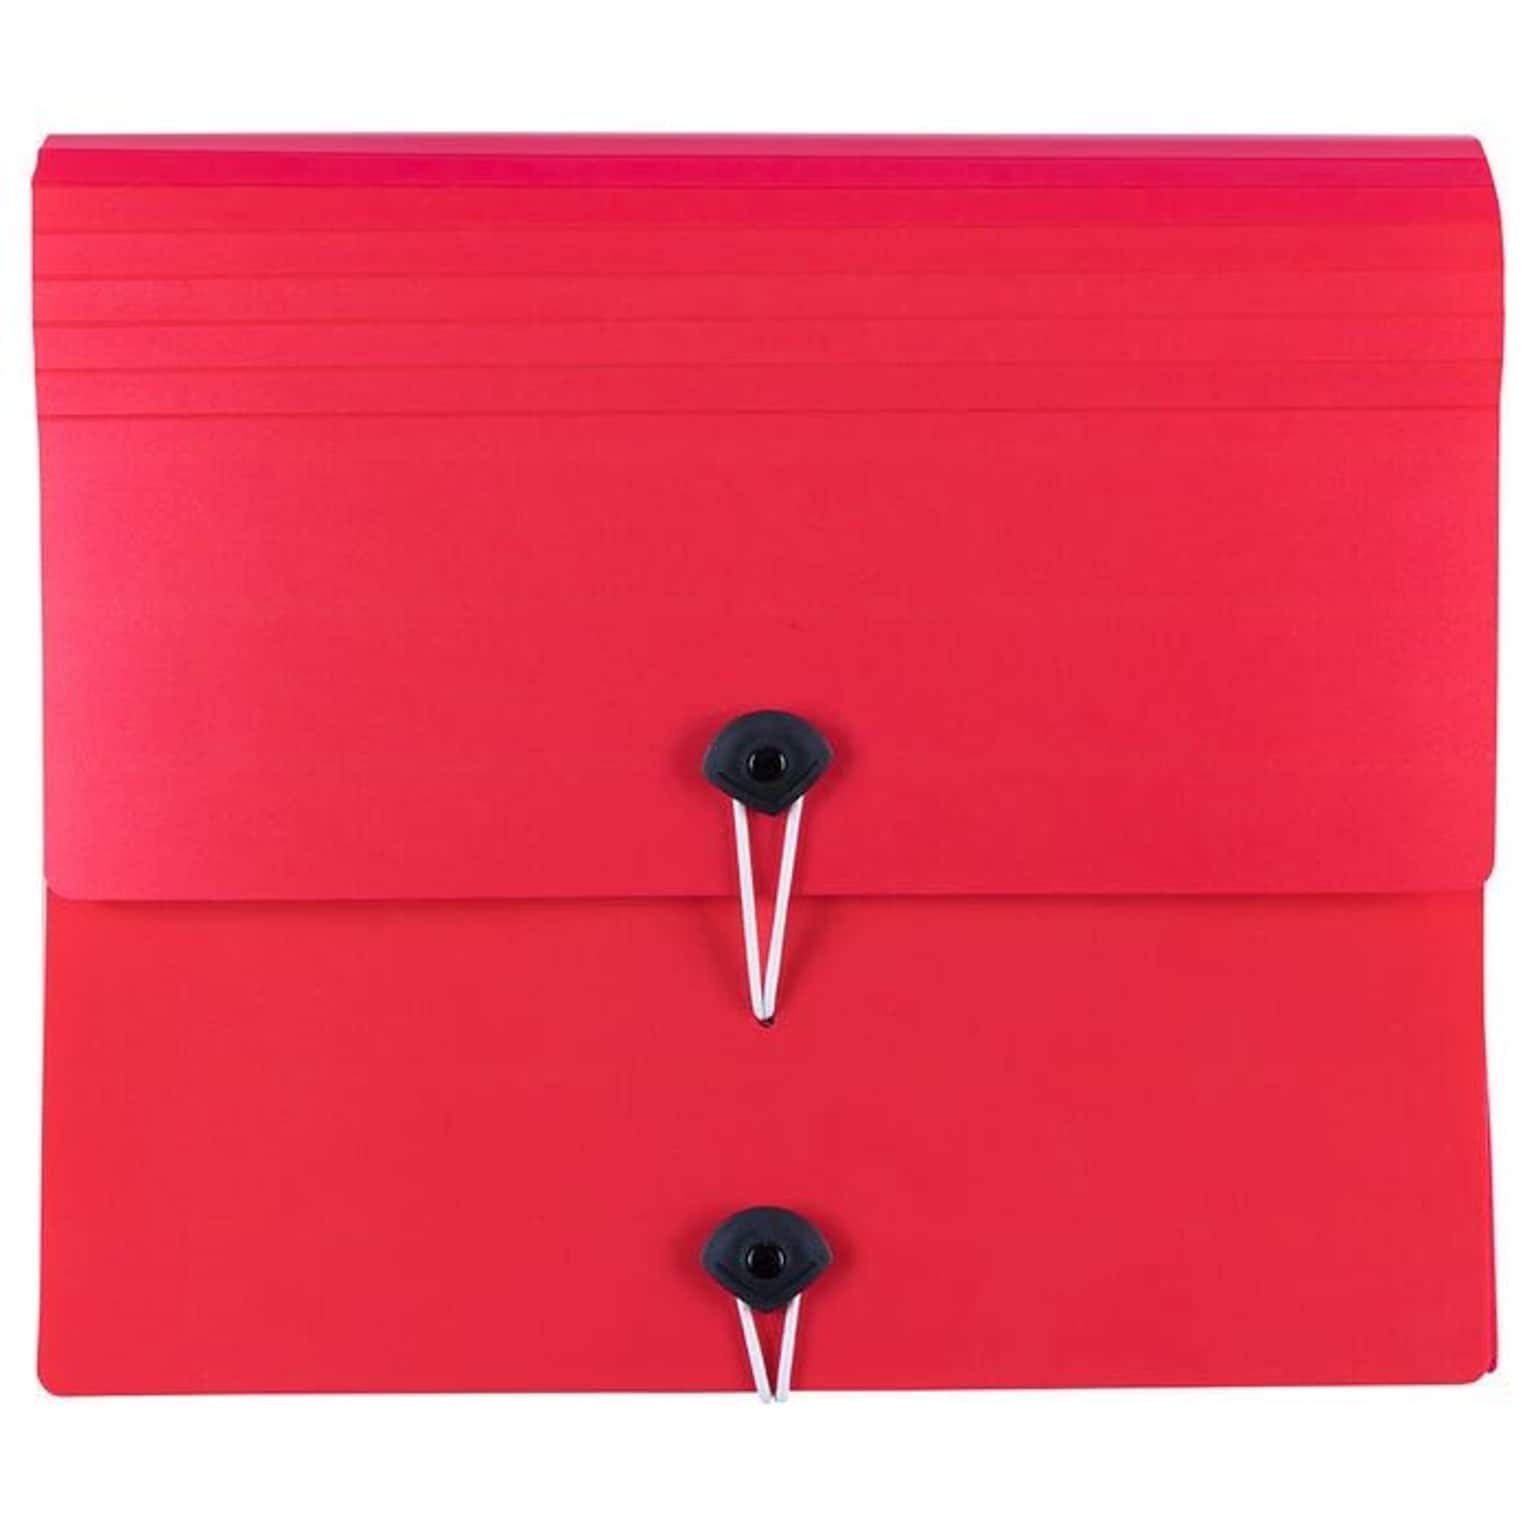 JAM PAPER Portfolio with Elastic Closure, 2 in 1 Binder and Expanding File, 13 x 11 1/4, Red (33439300)